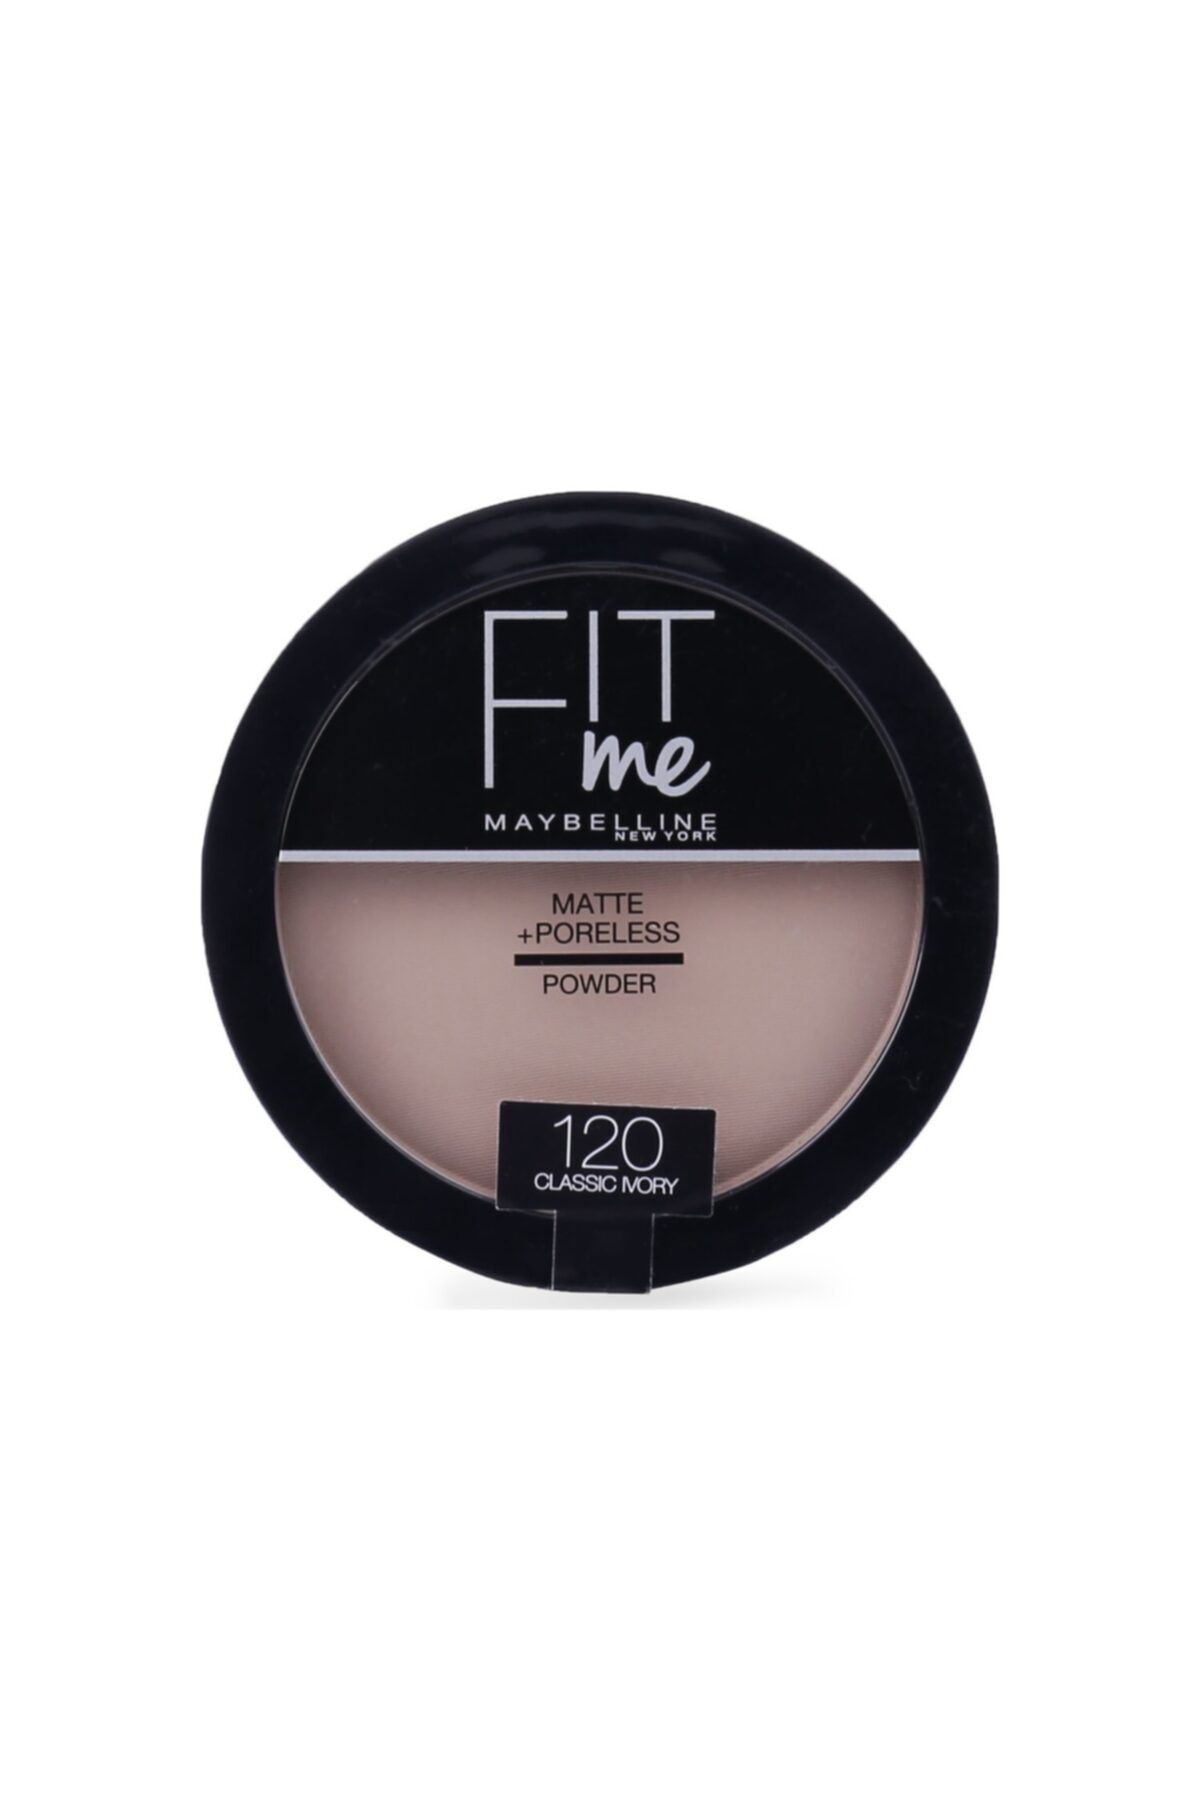 Maybelline New York Pudra - Fit Me Matte Poreless Powder 120 Classic Ivory 8992304057021